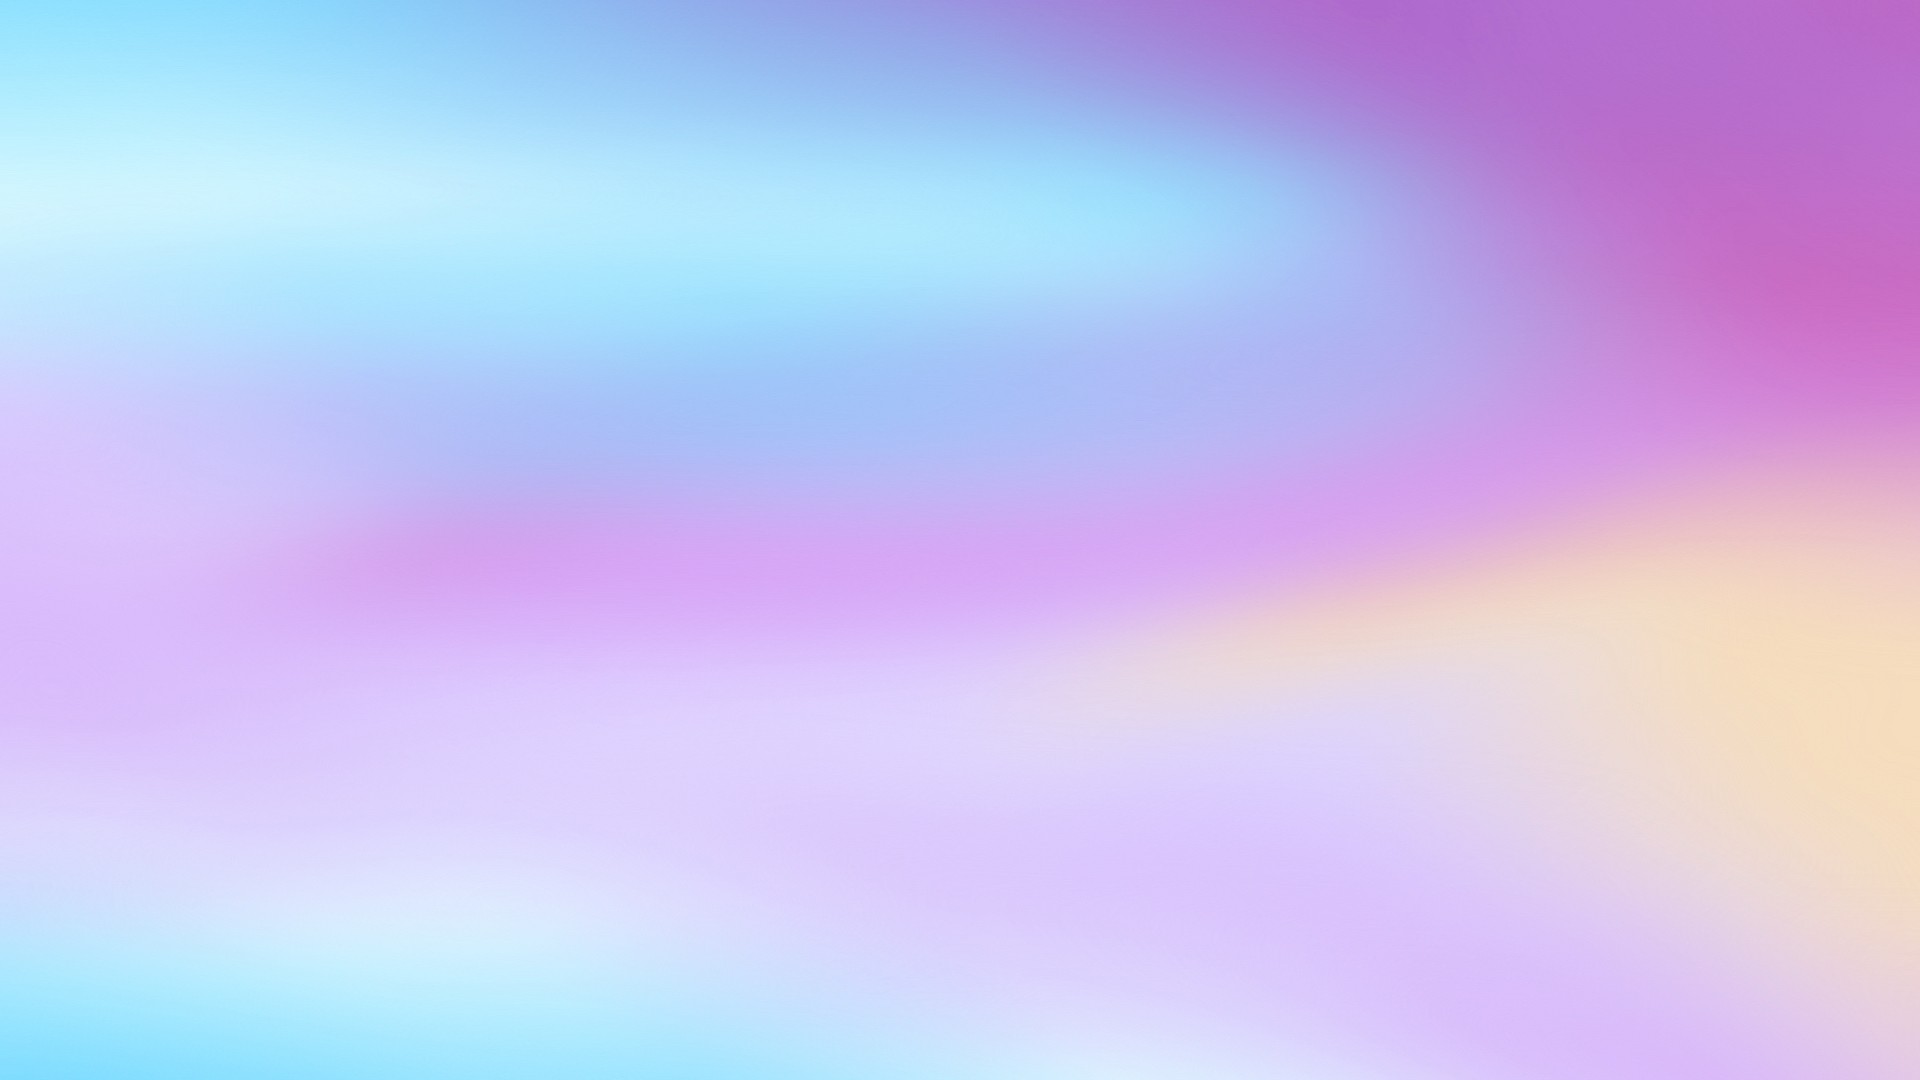 1920x1080 Pastel Colors Background Tumblr Midcentury Compact